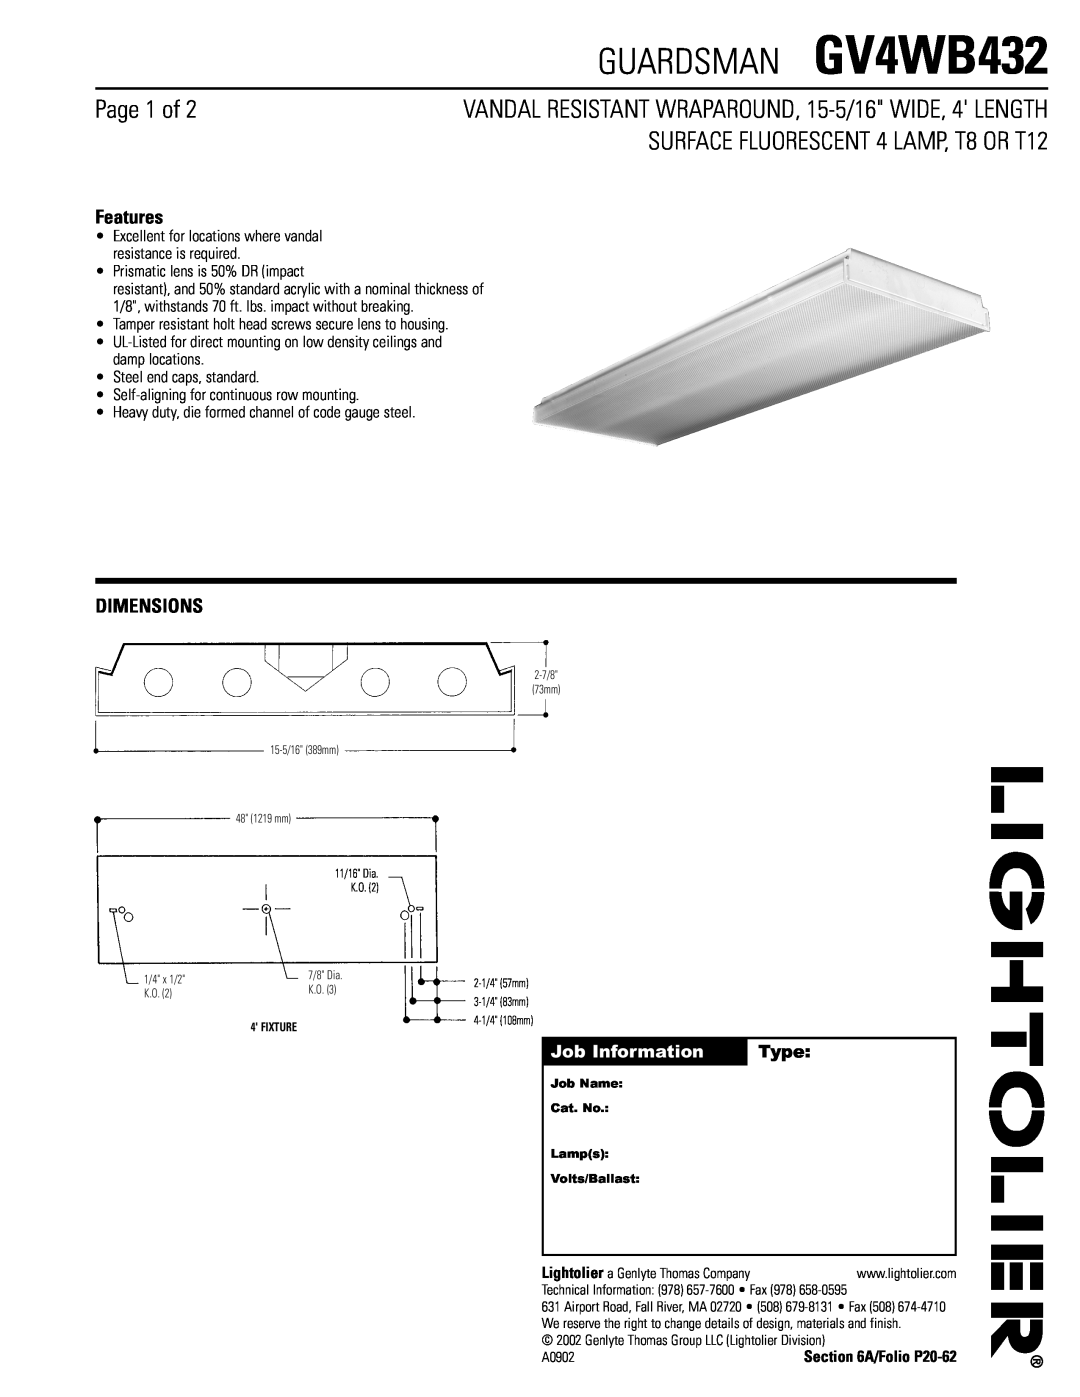 Lightolier dimensions Features, Dimensions, Job Information, Type, GUARDSMAN GV4WB432, Page 1 of 